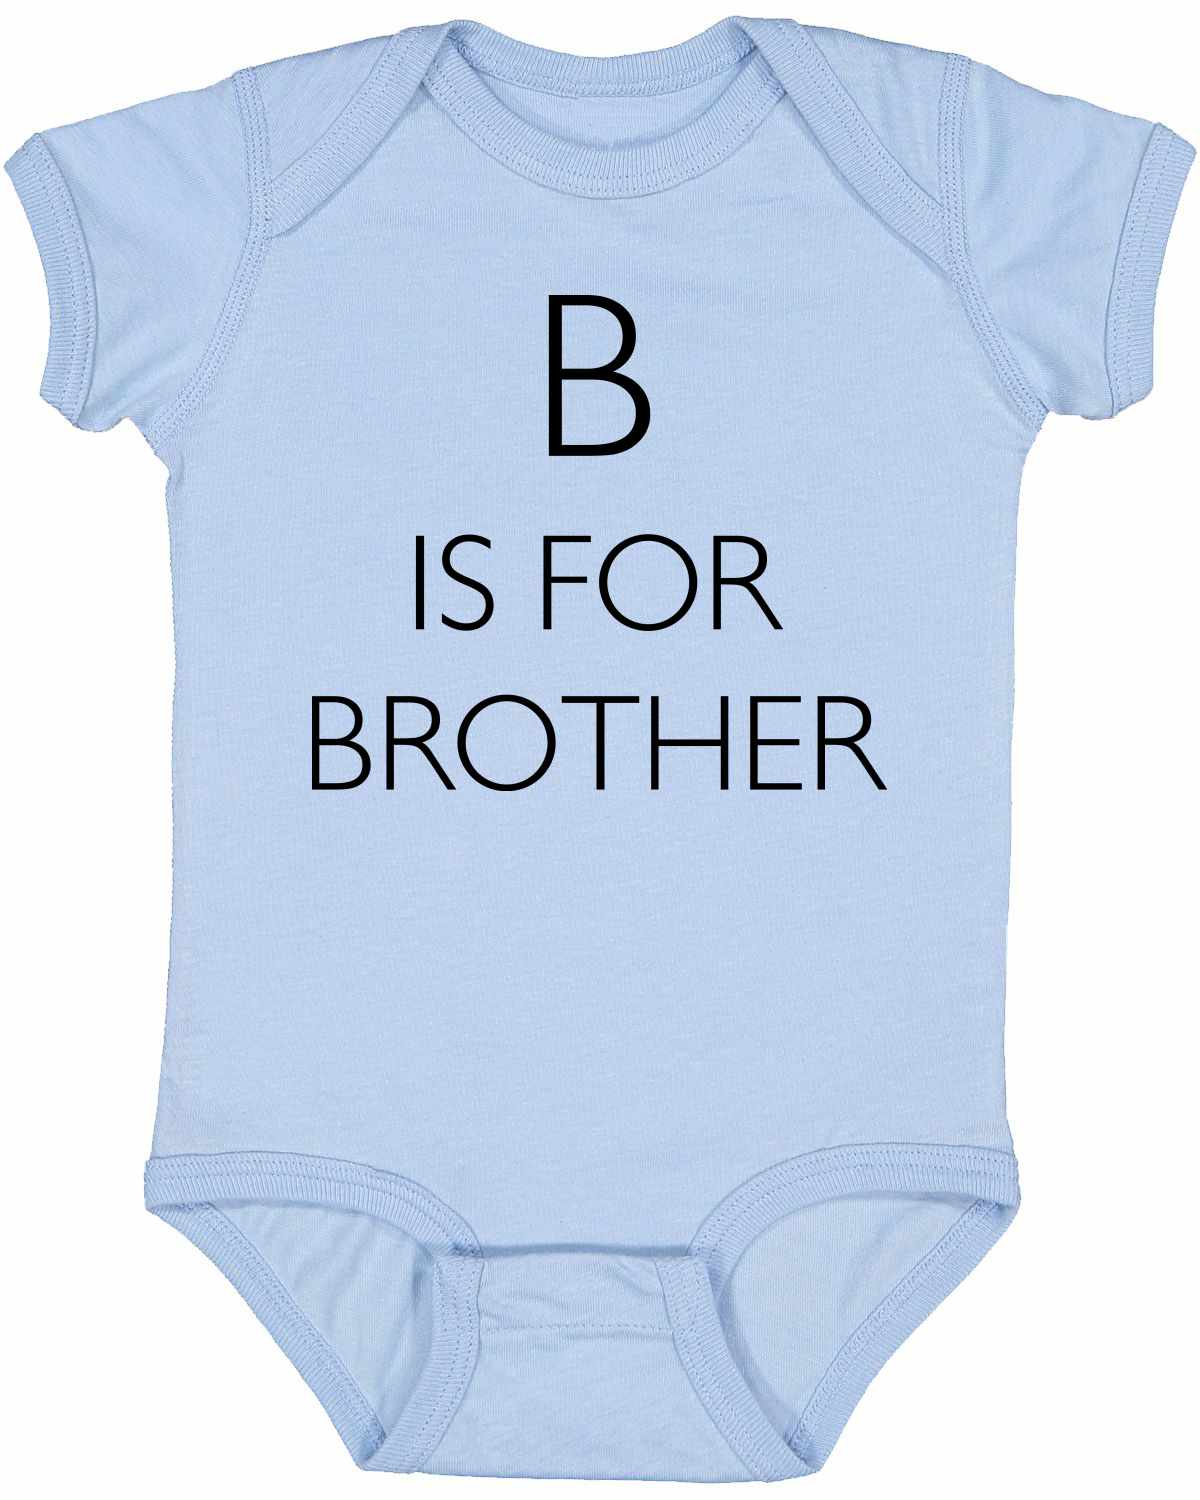 B is for Brother Infant BodySuit